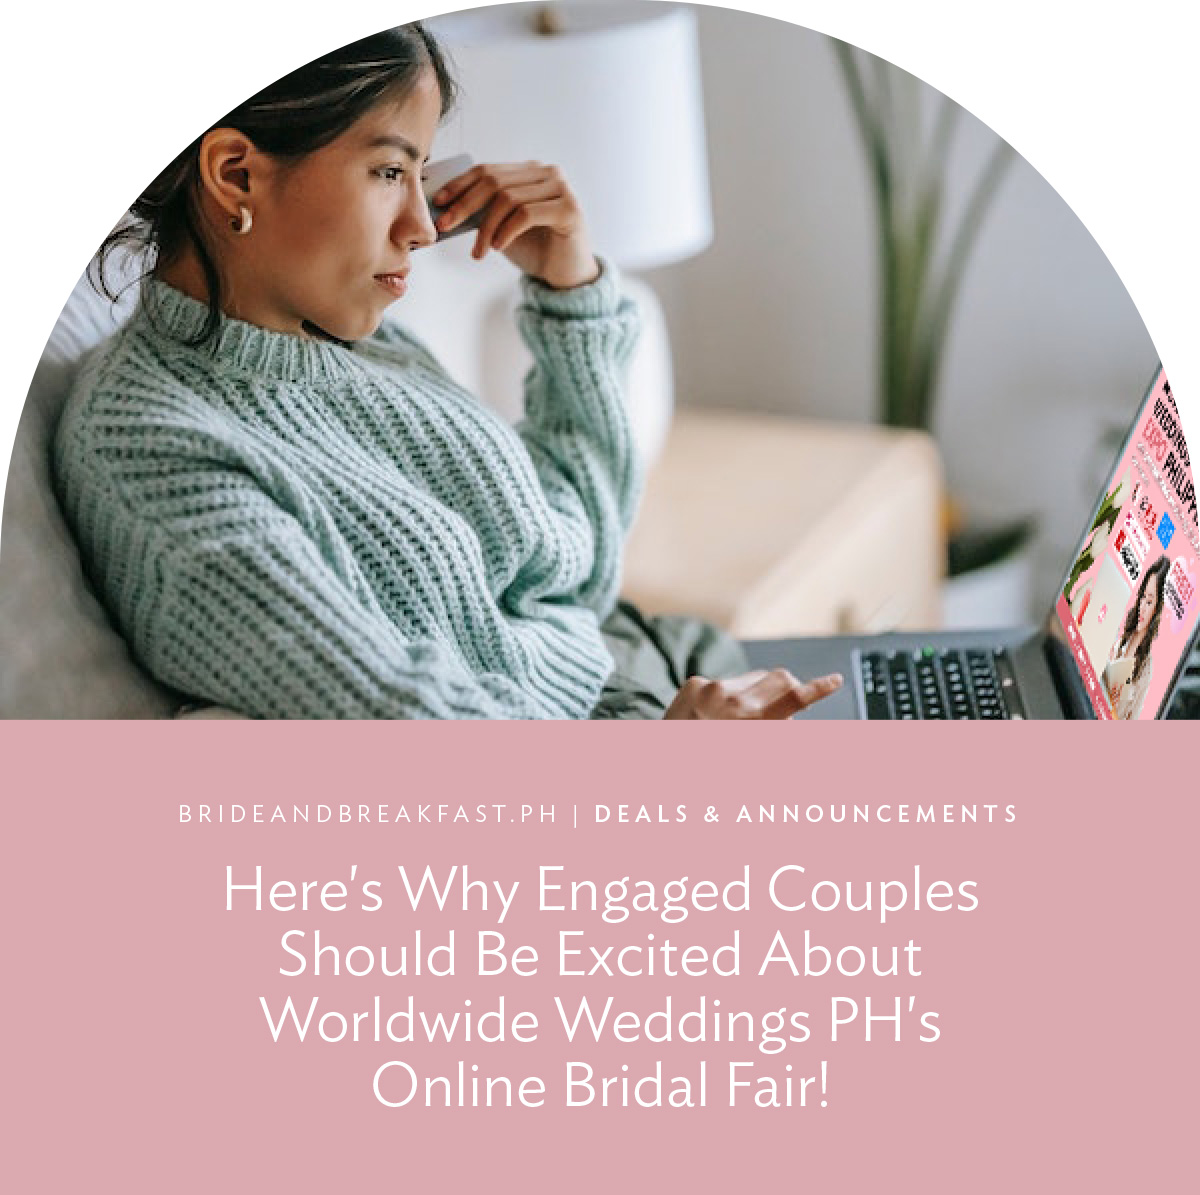 Here's Why Engaged Couples Should Be Excited About Worldwide Weddings PH's Online Bridal Fair!